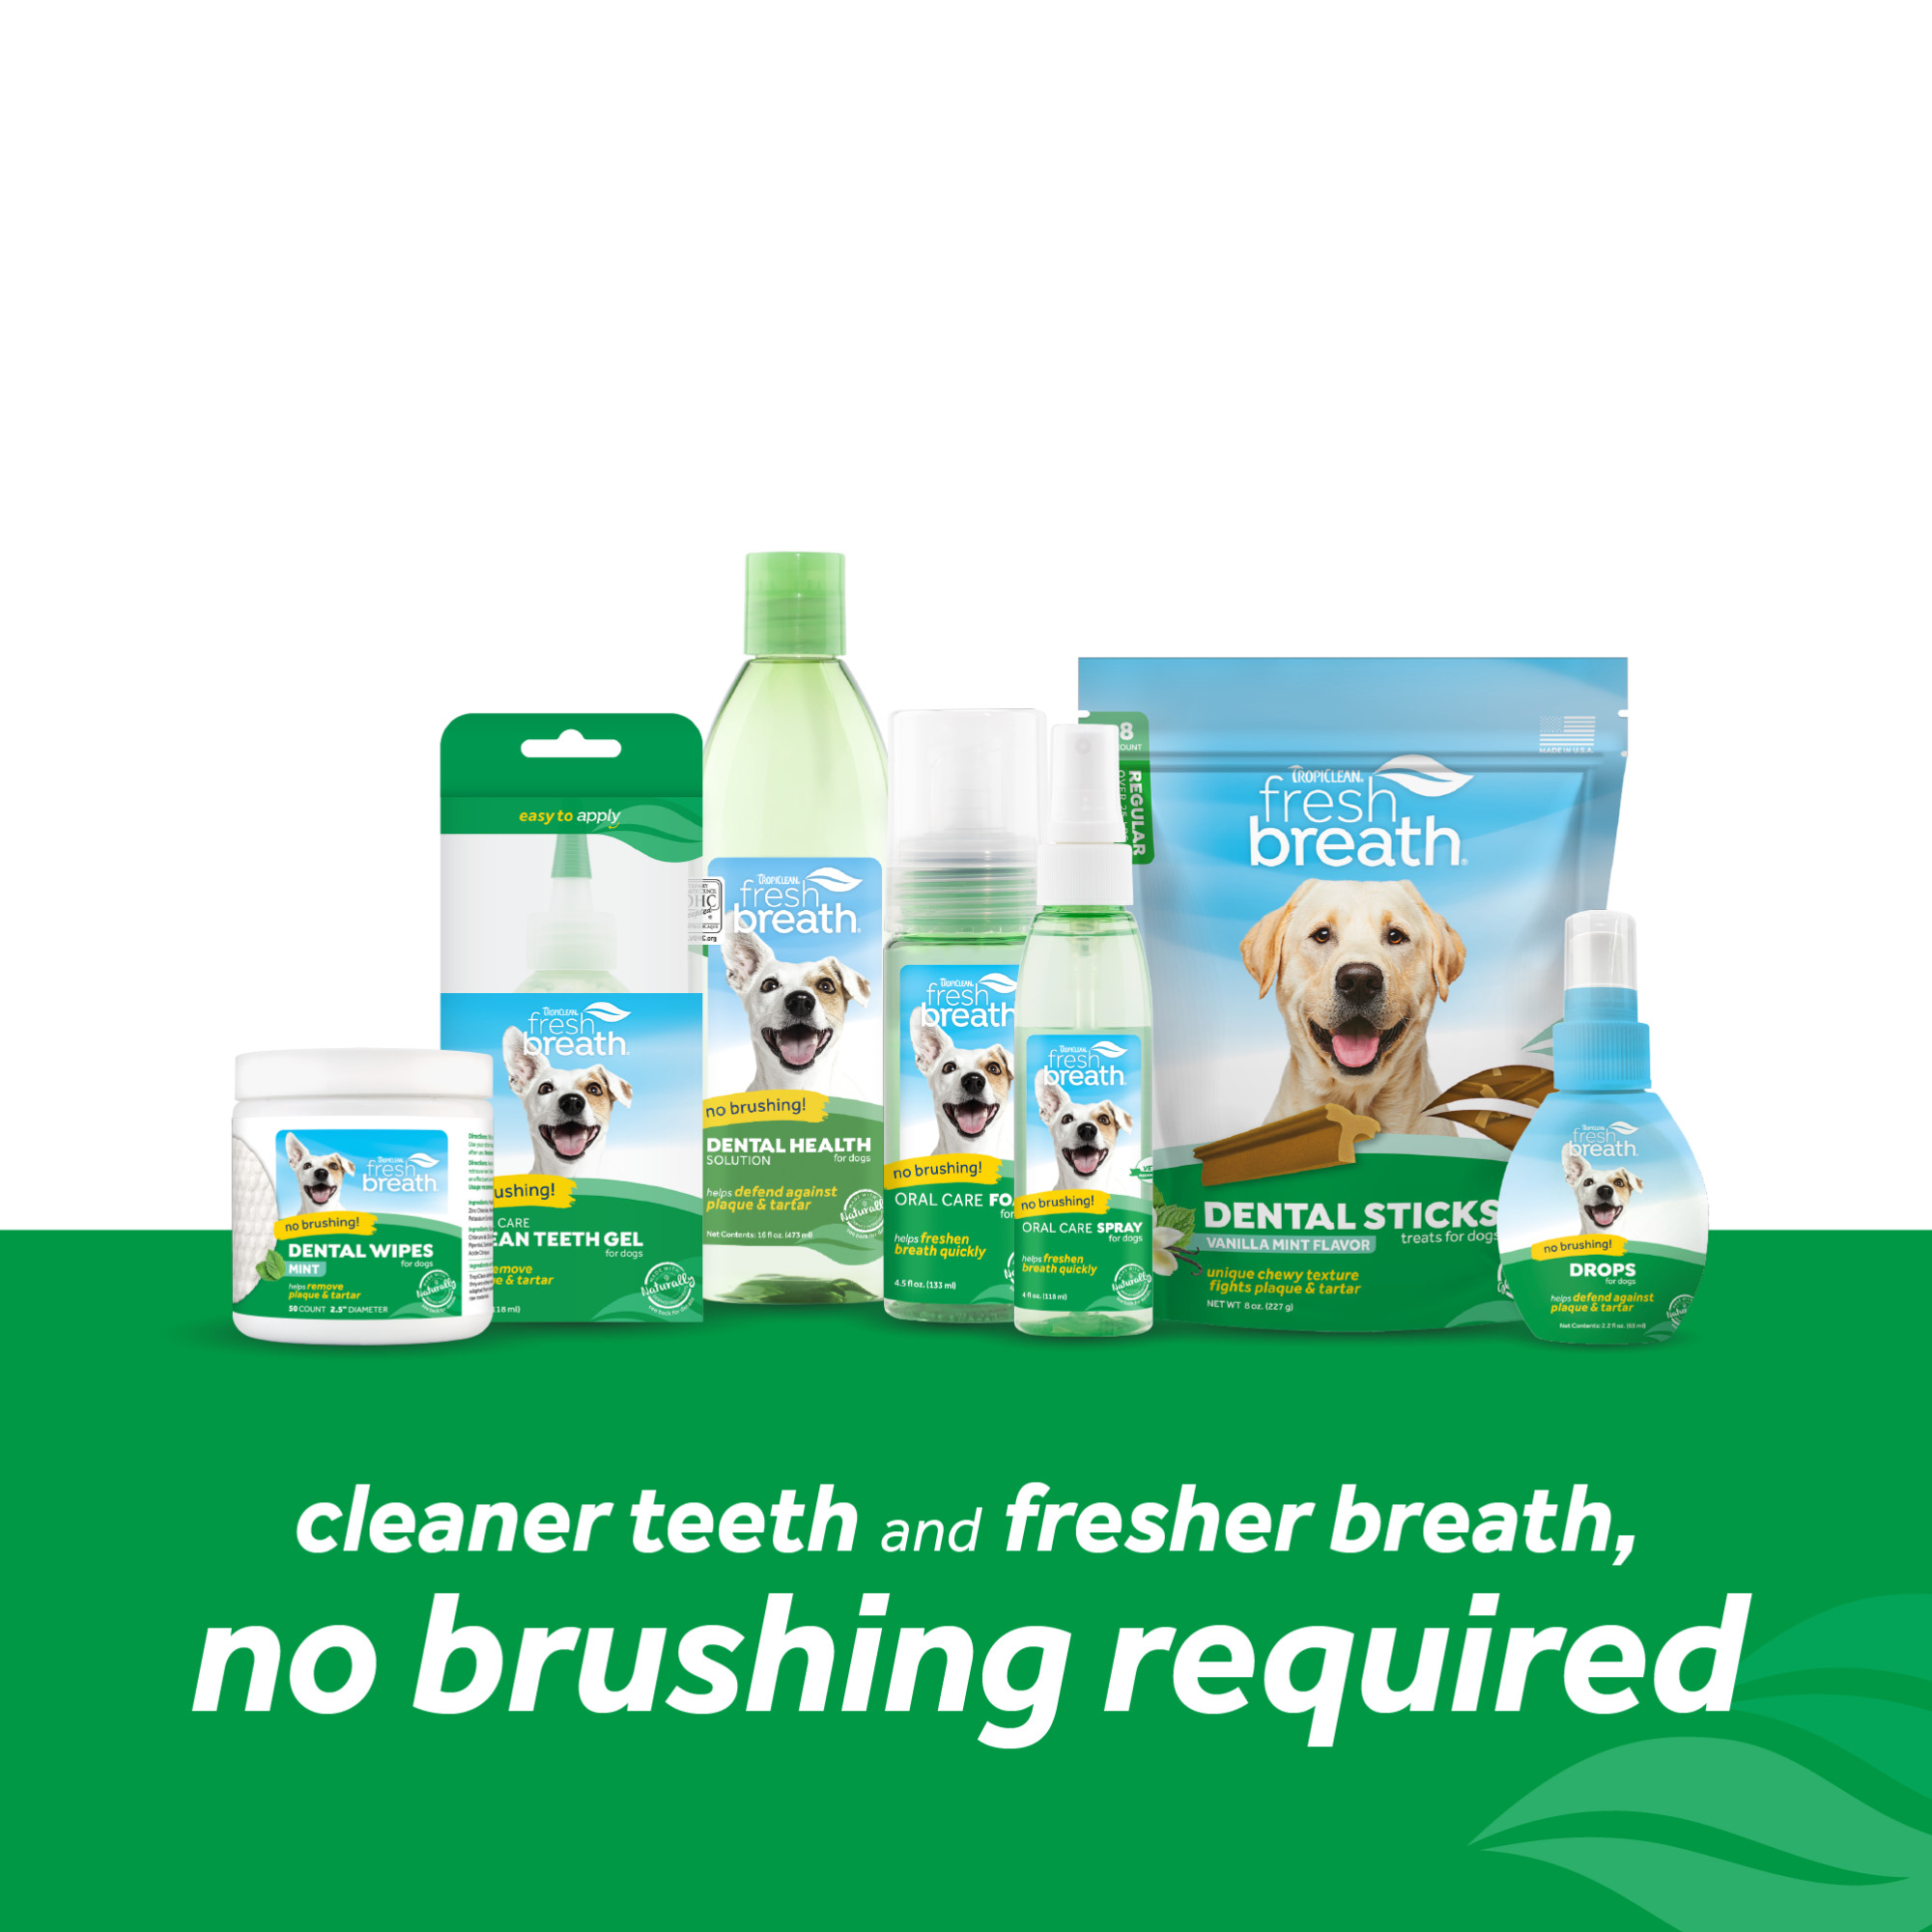 Oral Care Foam for Dogs